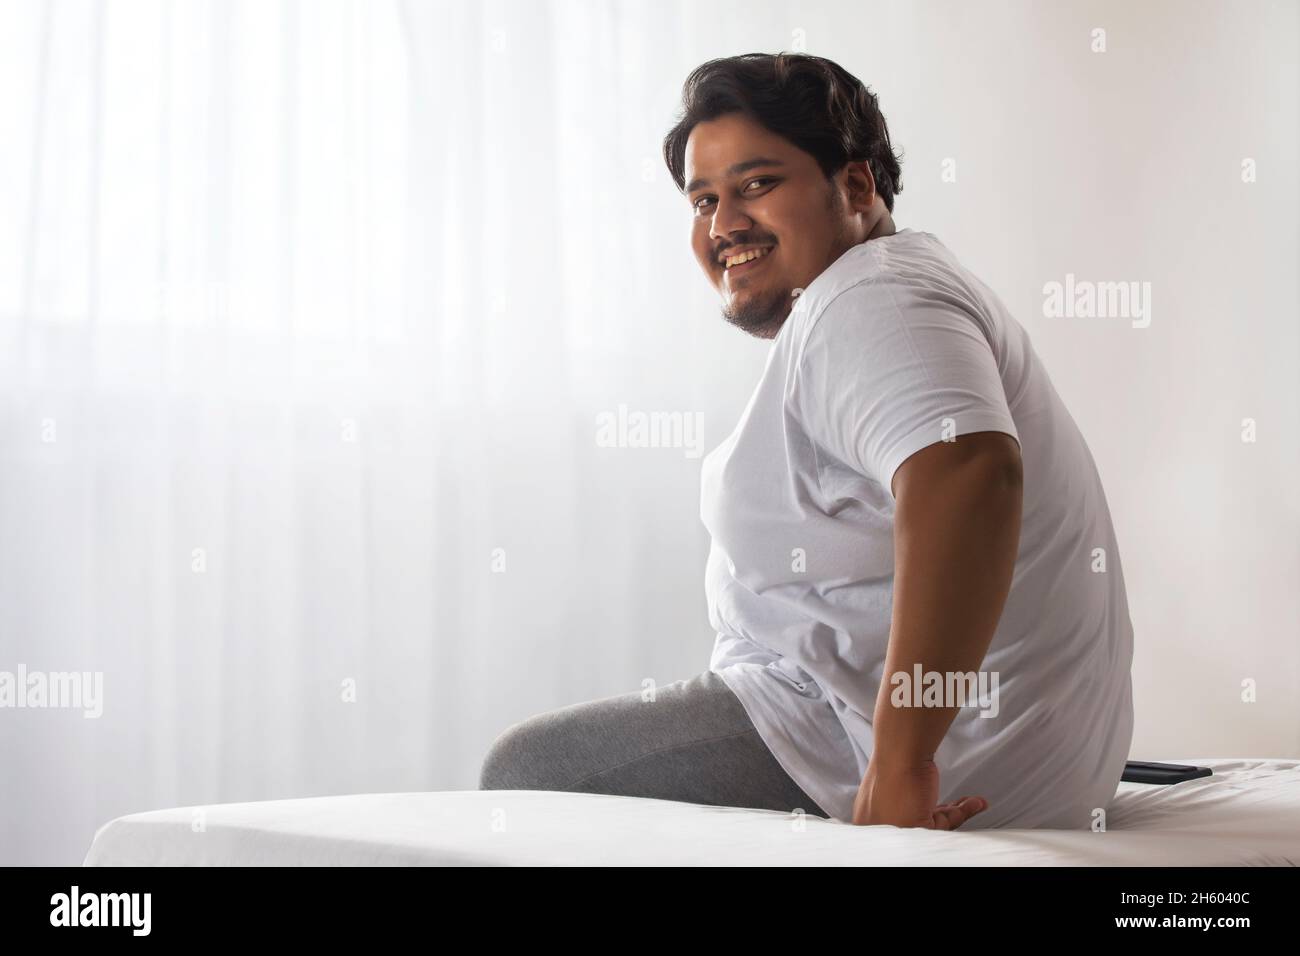 A fat man smiling while sitting in his room. Stock Photo